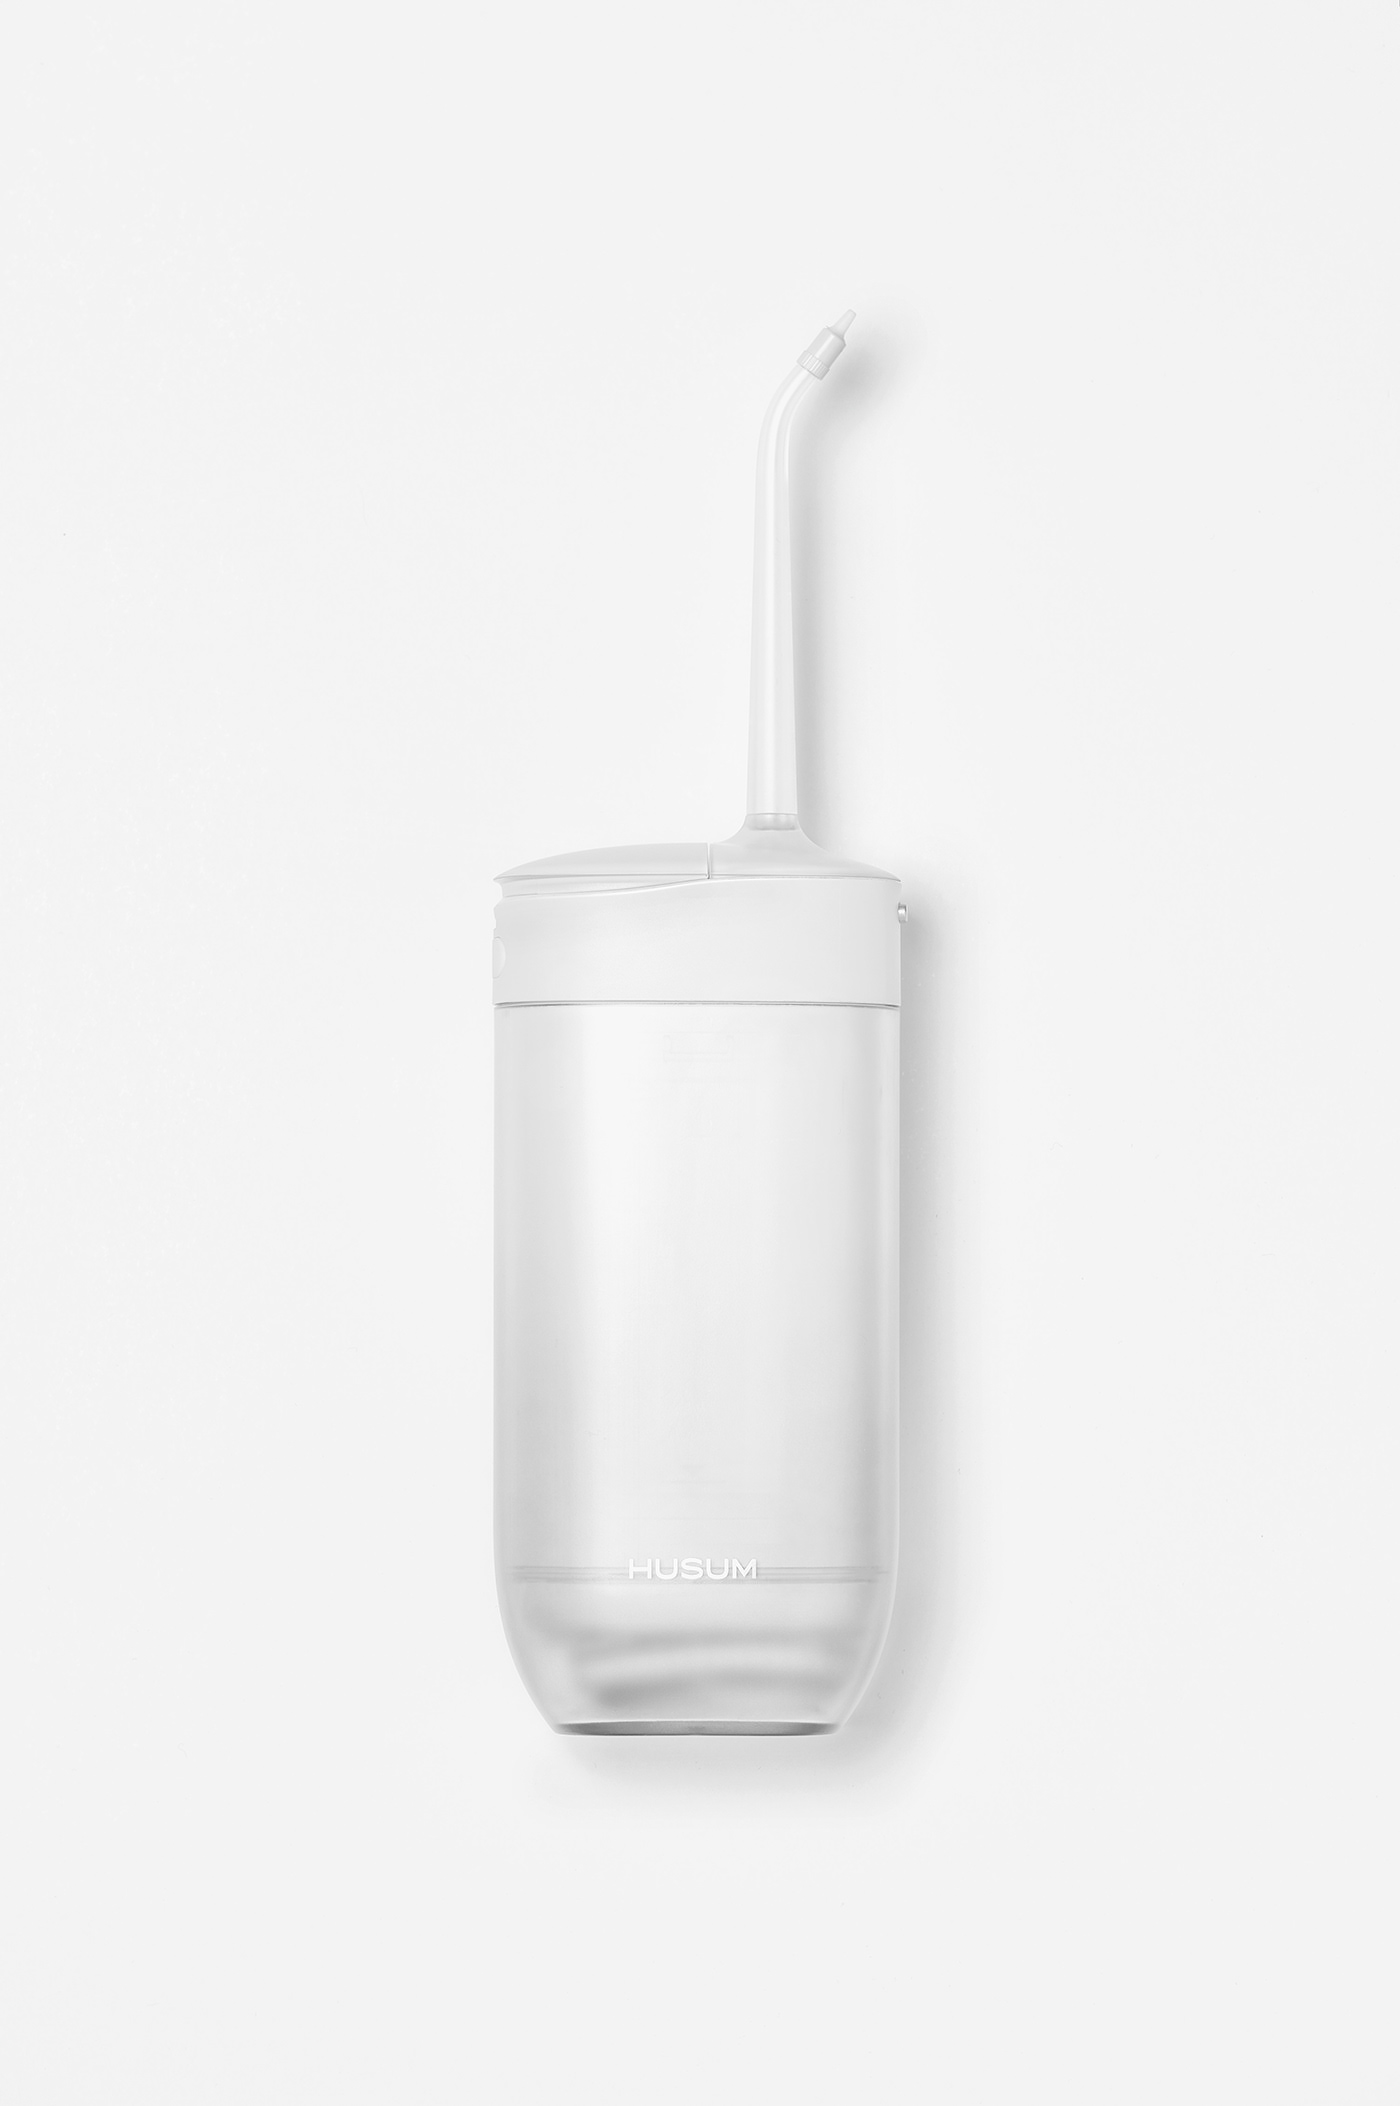 product design  design clean water product secondwhite second white oral irrigator industrial design  water flosser